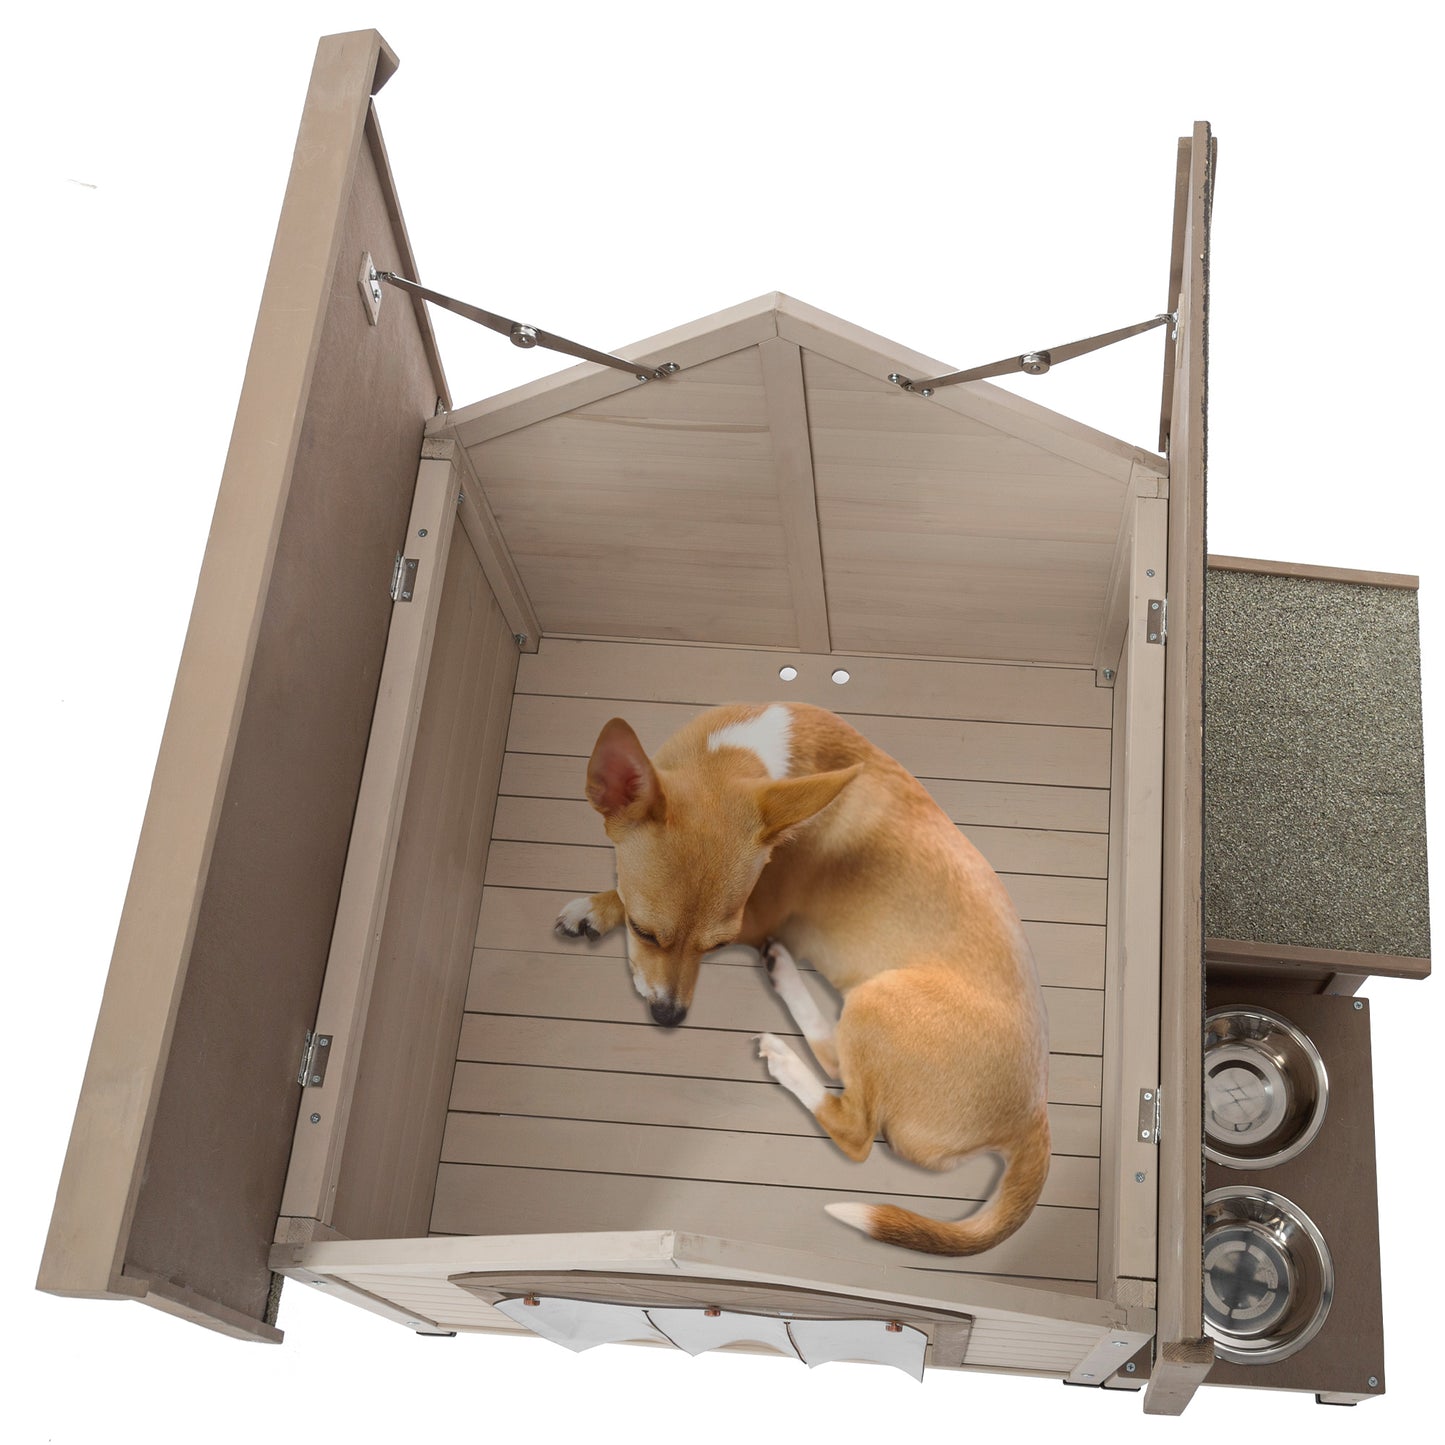 Outdoor fir wood dog house with an open roof ideal for small to medium dogs. With storage box, elevated feeding station with 2 bowls. Weatherproof asphalt roof and treated wood.